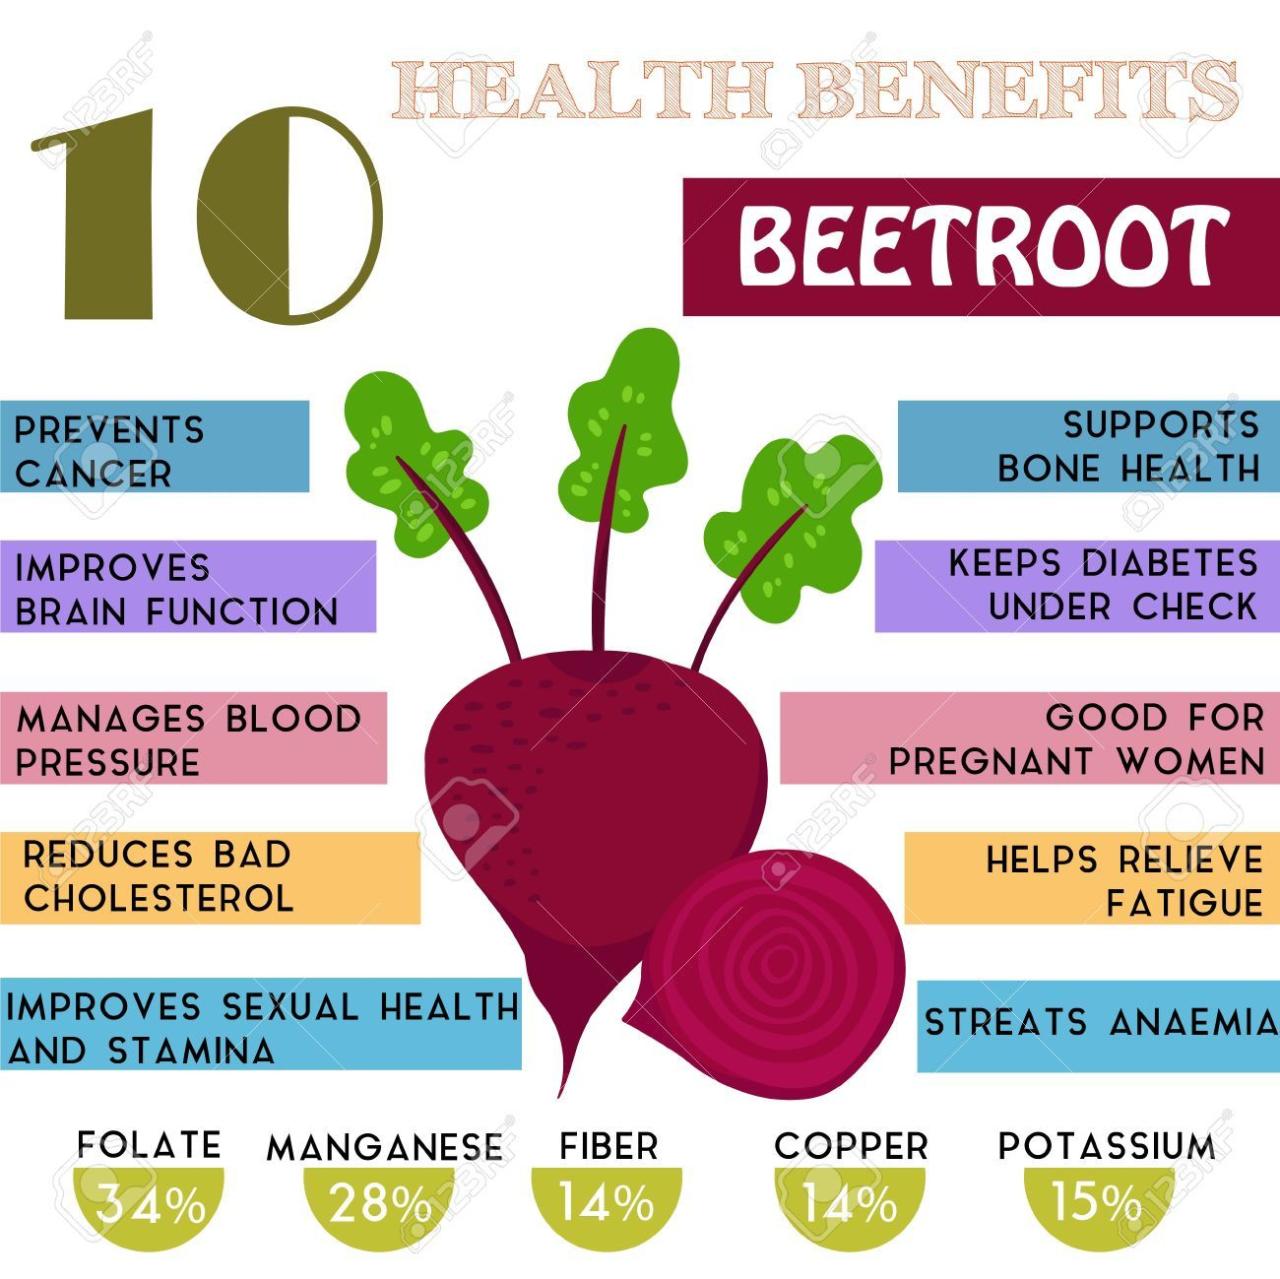 Benefits beets beet juice health sugar nutrition organic beat facts juicing recipes oawhealth which